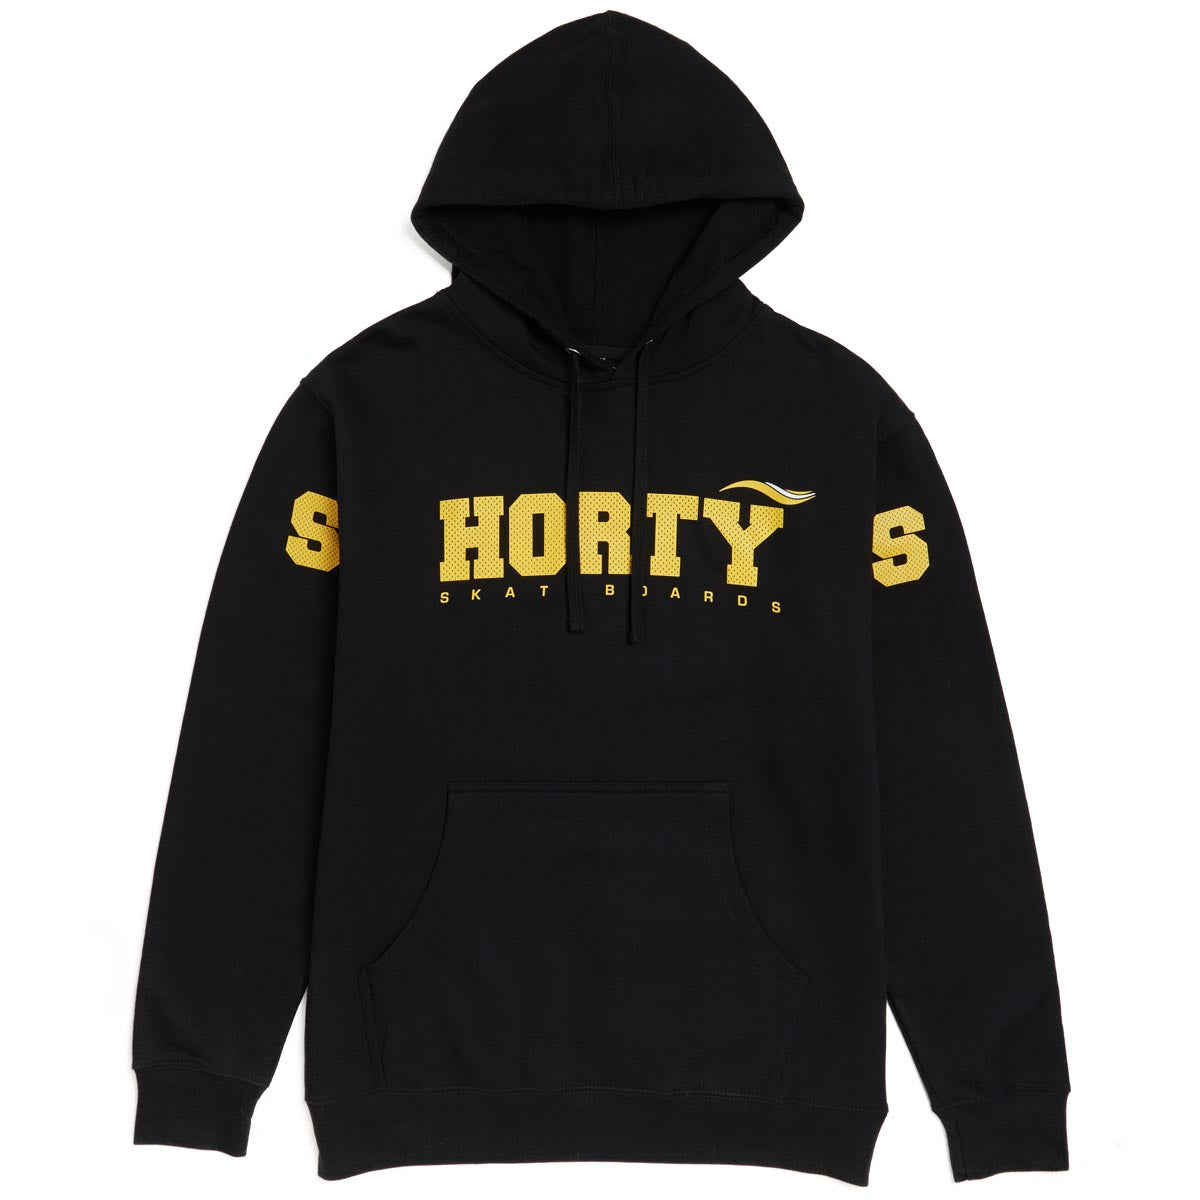 Shorty's S-horty-S Mesh Hoodie - Black image 1